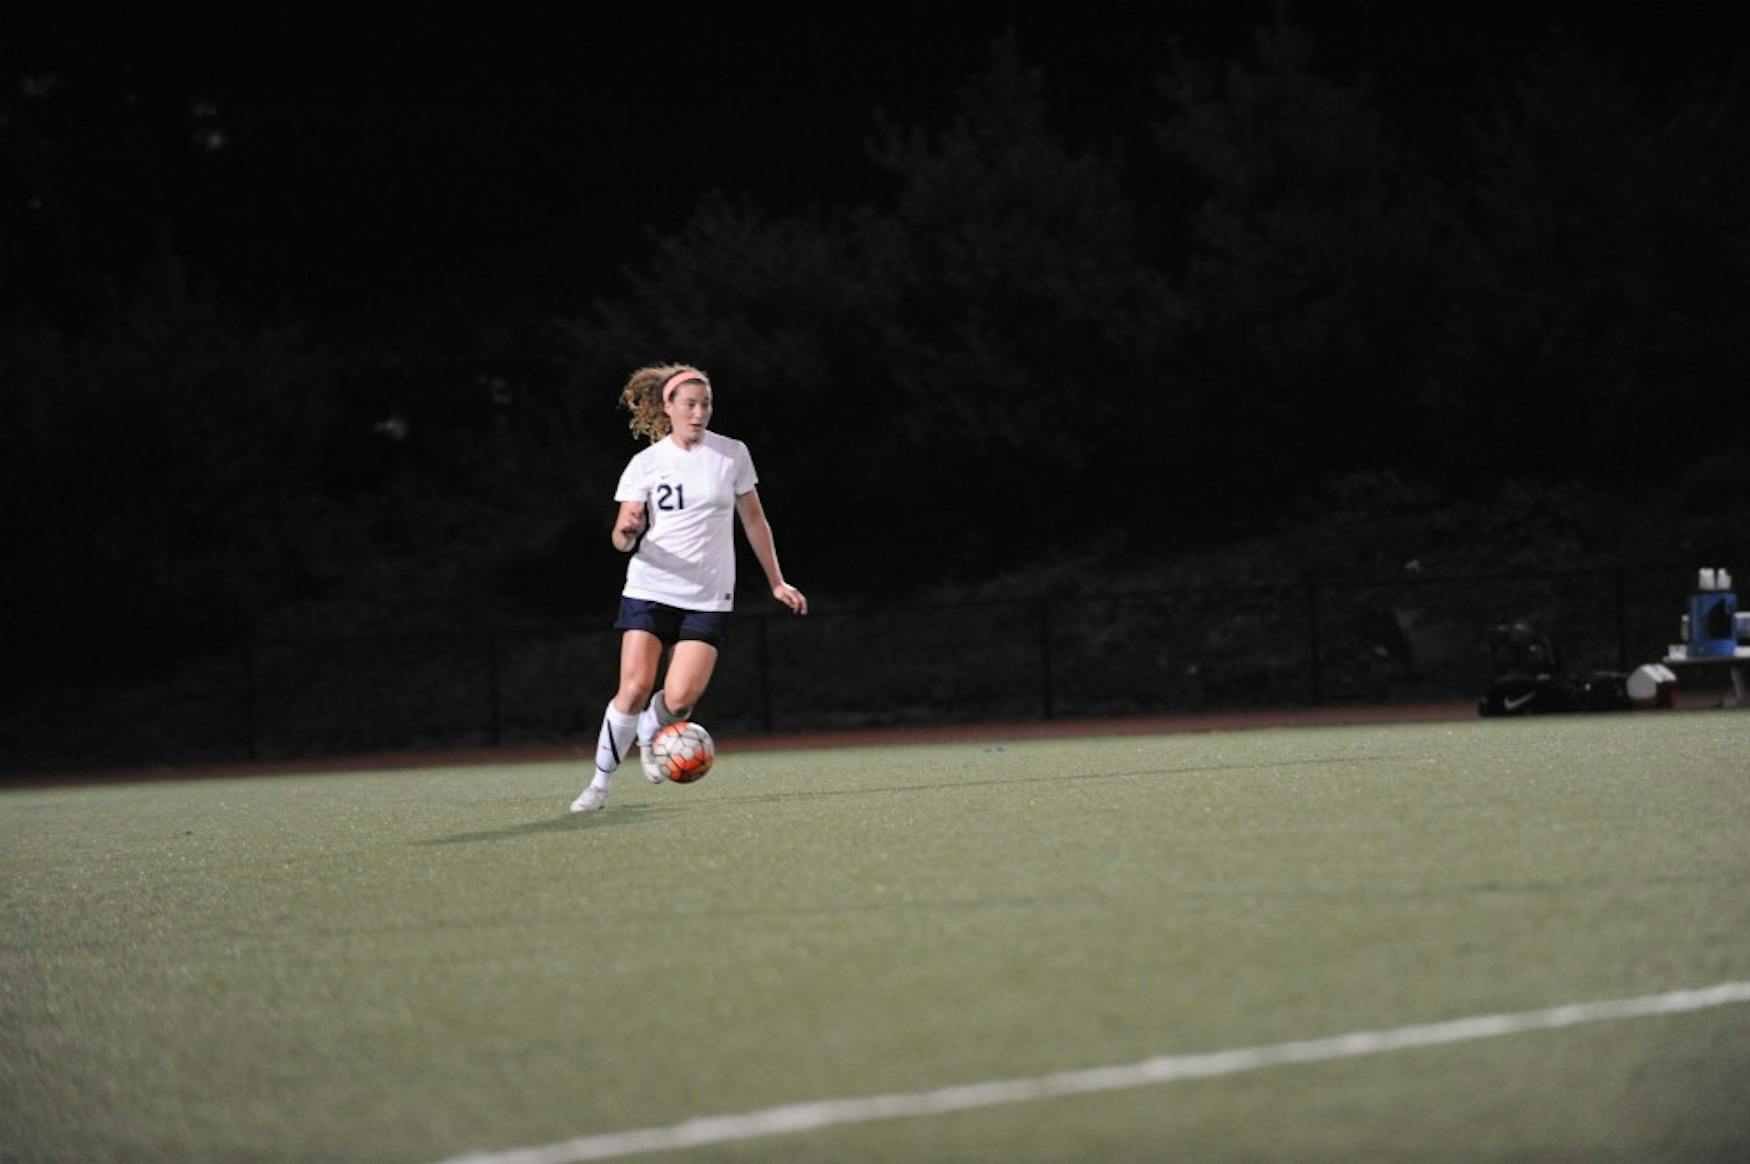 OFF TO A FAST START: Defender Haley Schachter ’16 brings the ball forward during a 2-0 victory over Wheaton College.